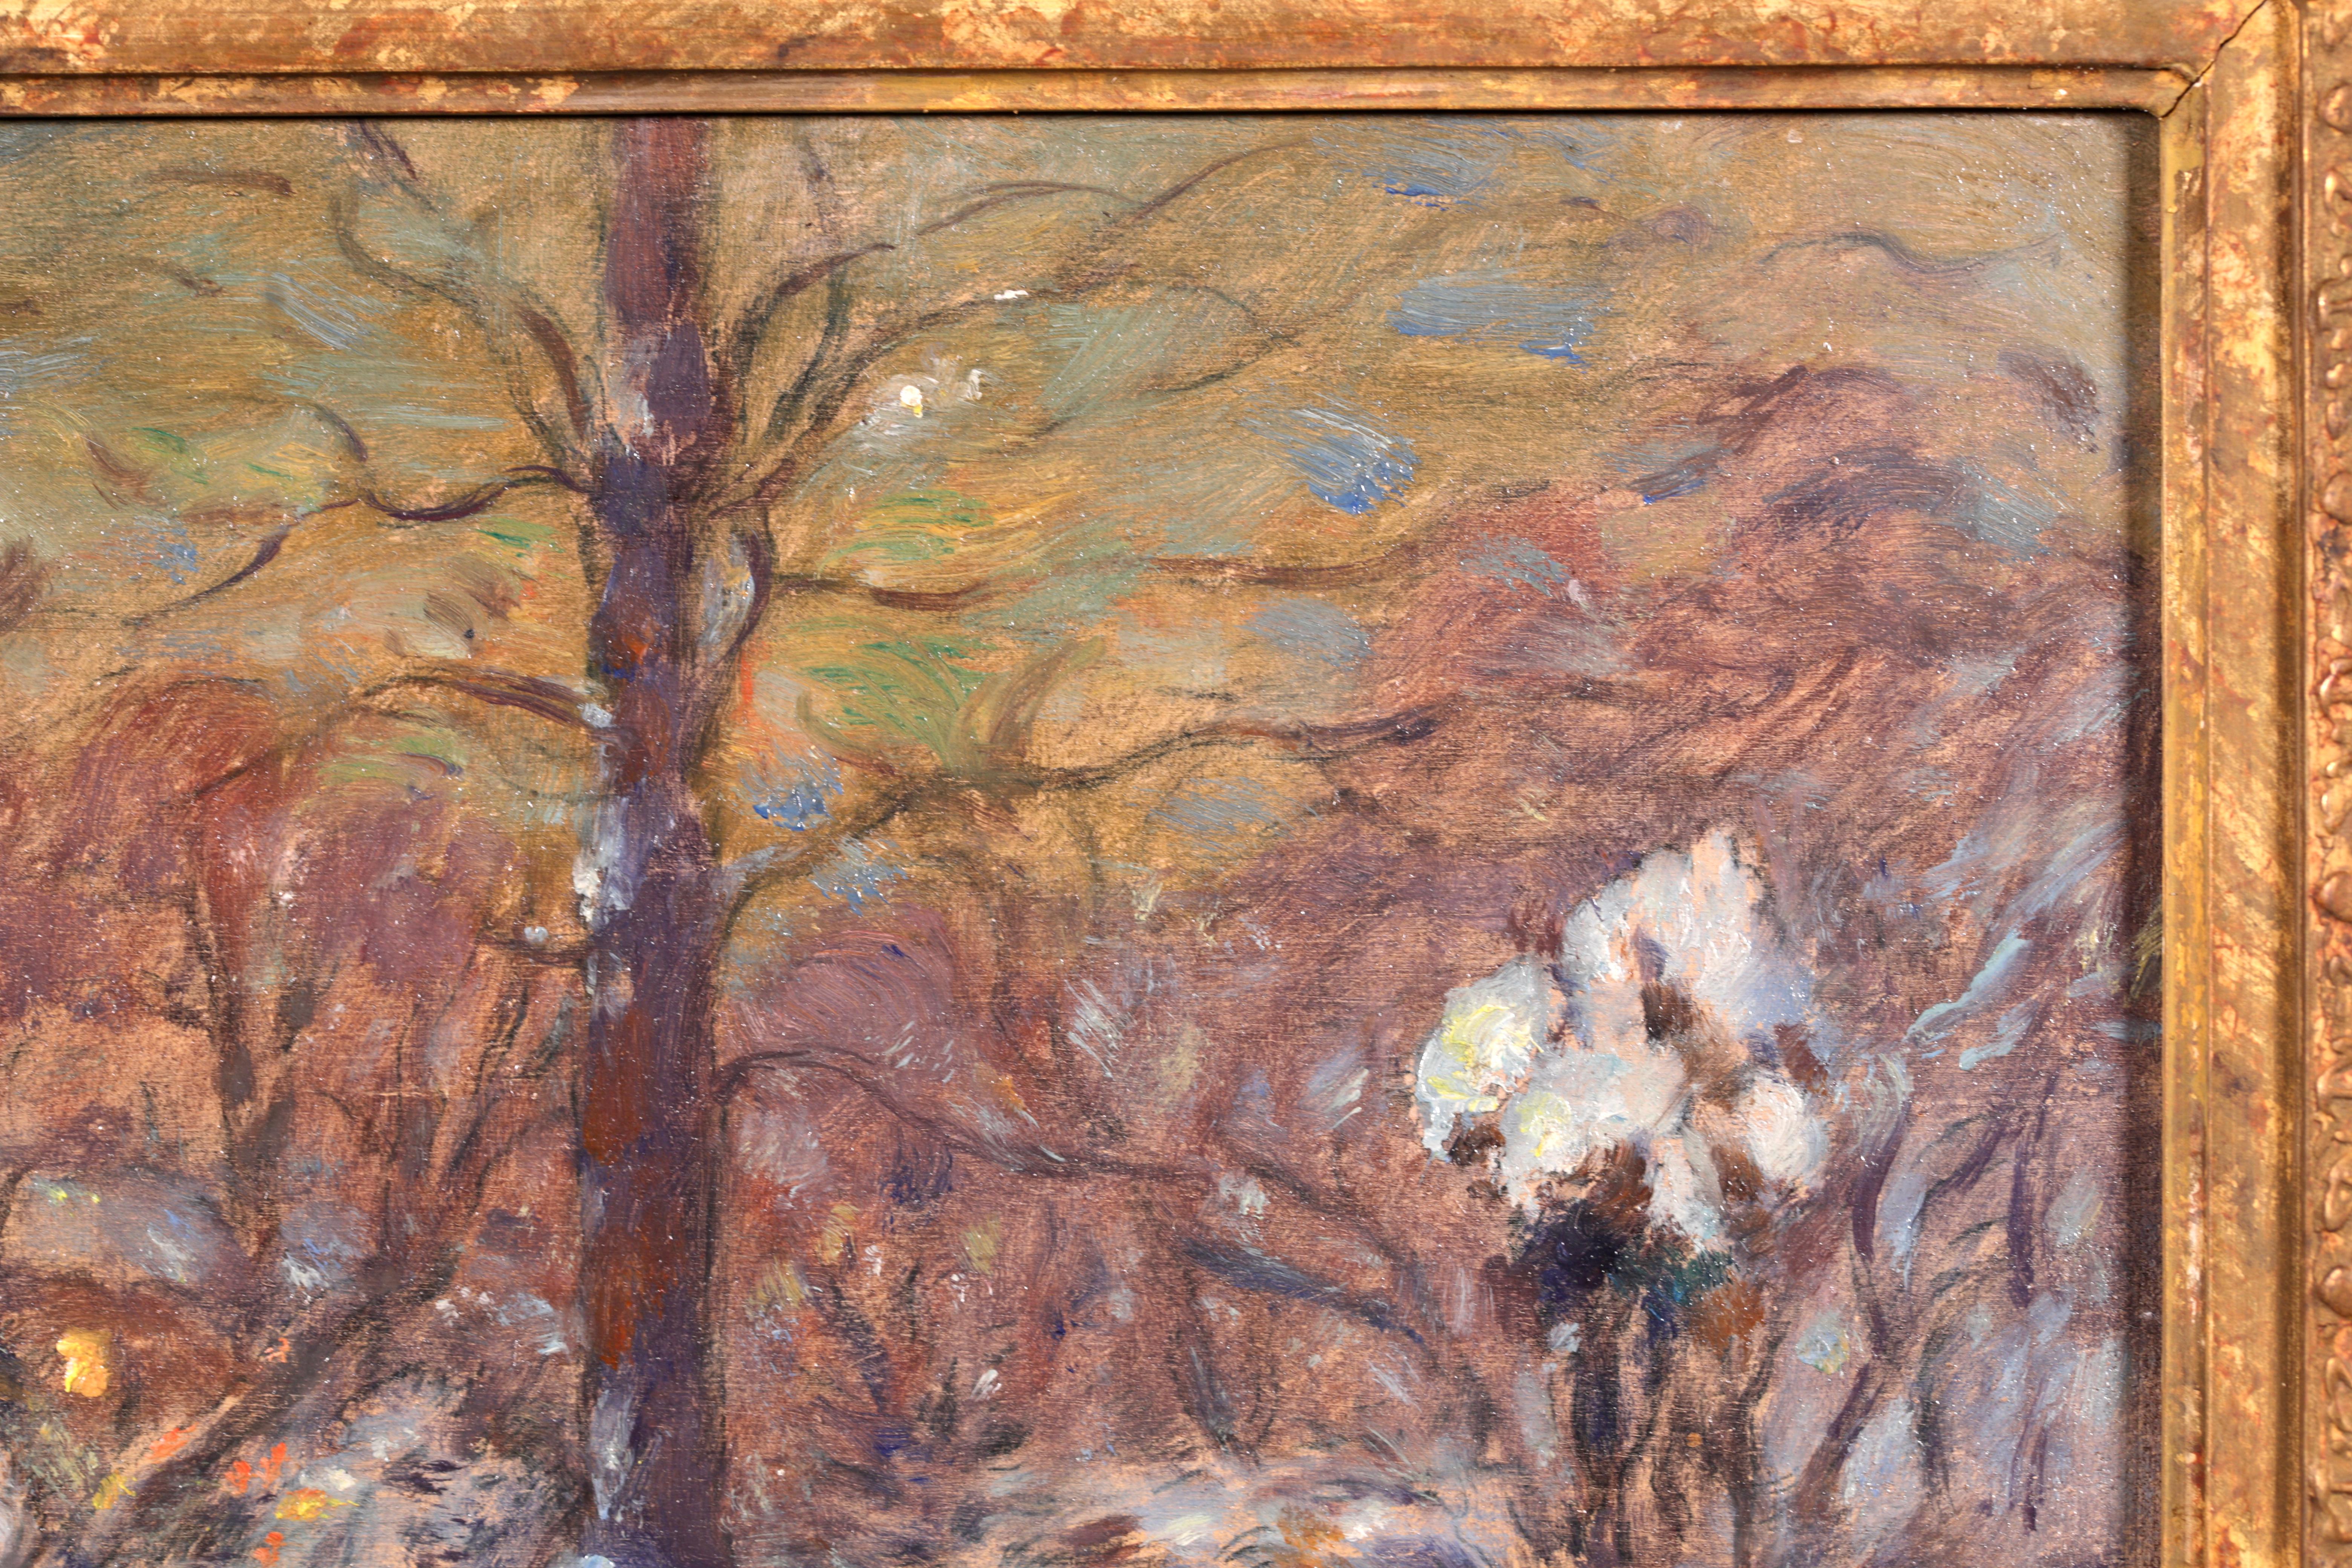 Oil on panel circa 1910 by French Impressionist painter Marie Duhem. The work depicts a garden under a blanket of snow. The use of colour - particularly whites and yellows - to demonstrate the last light reflecting off the snow is beautiful.